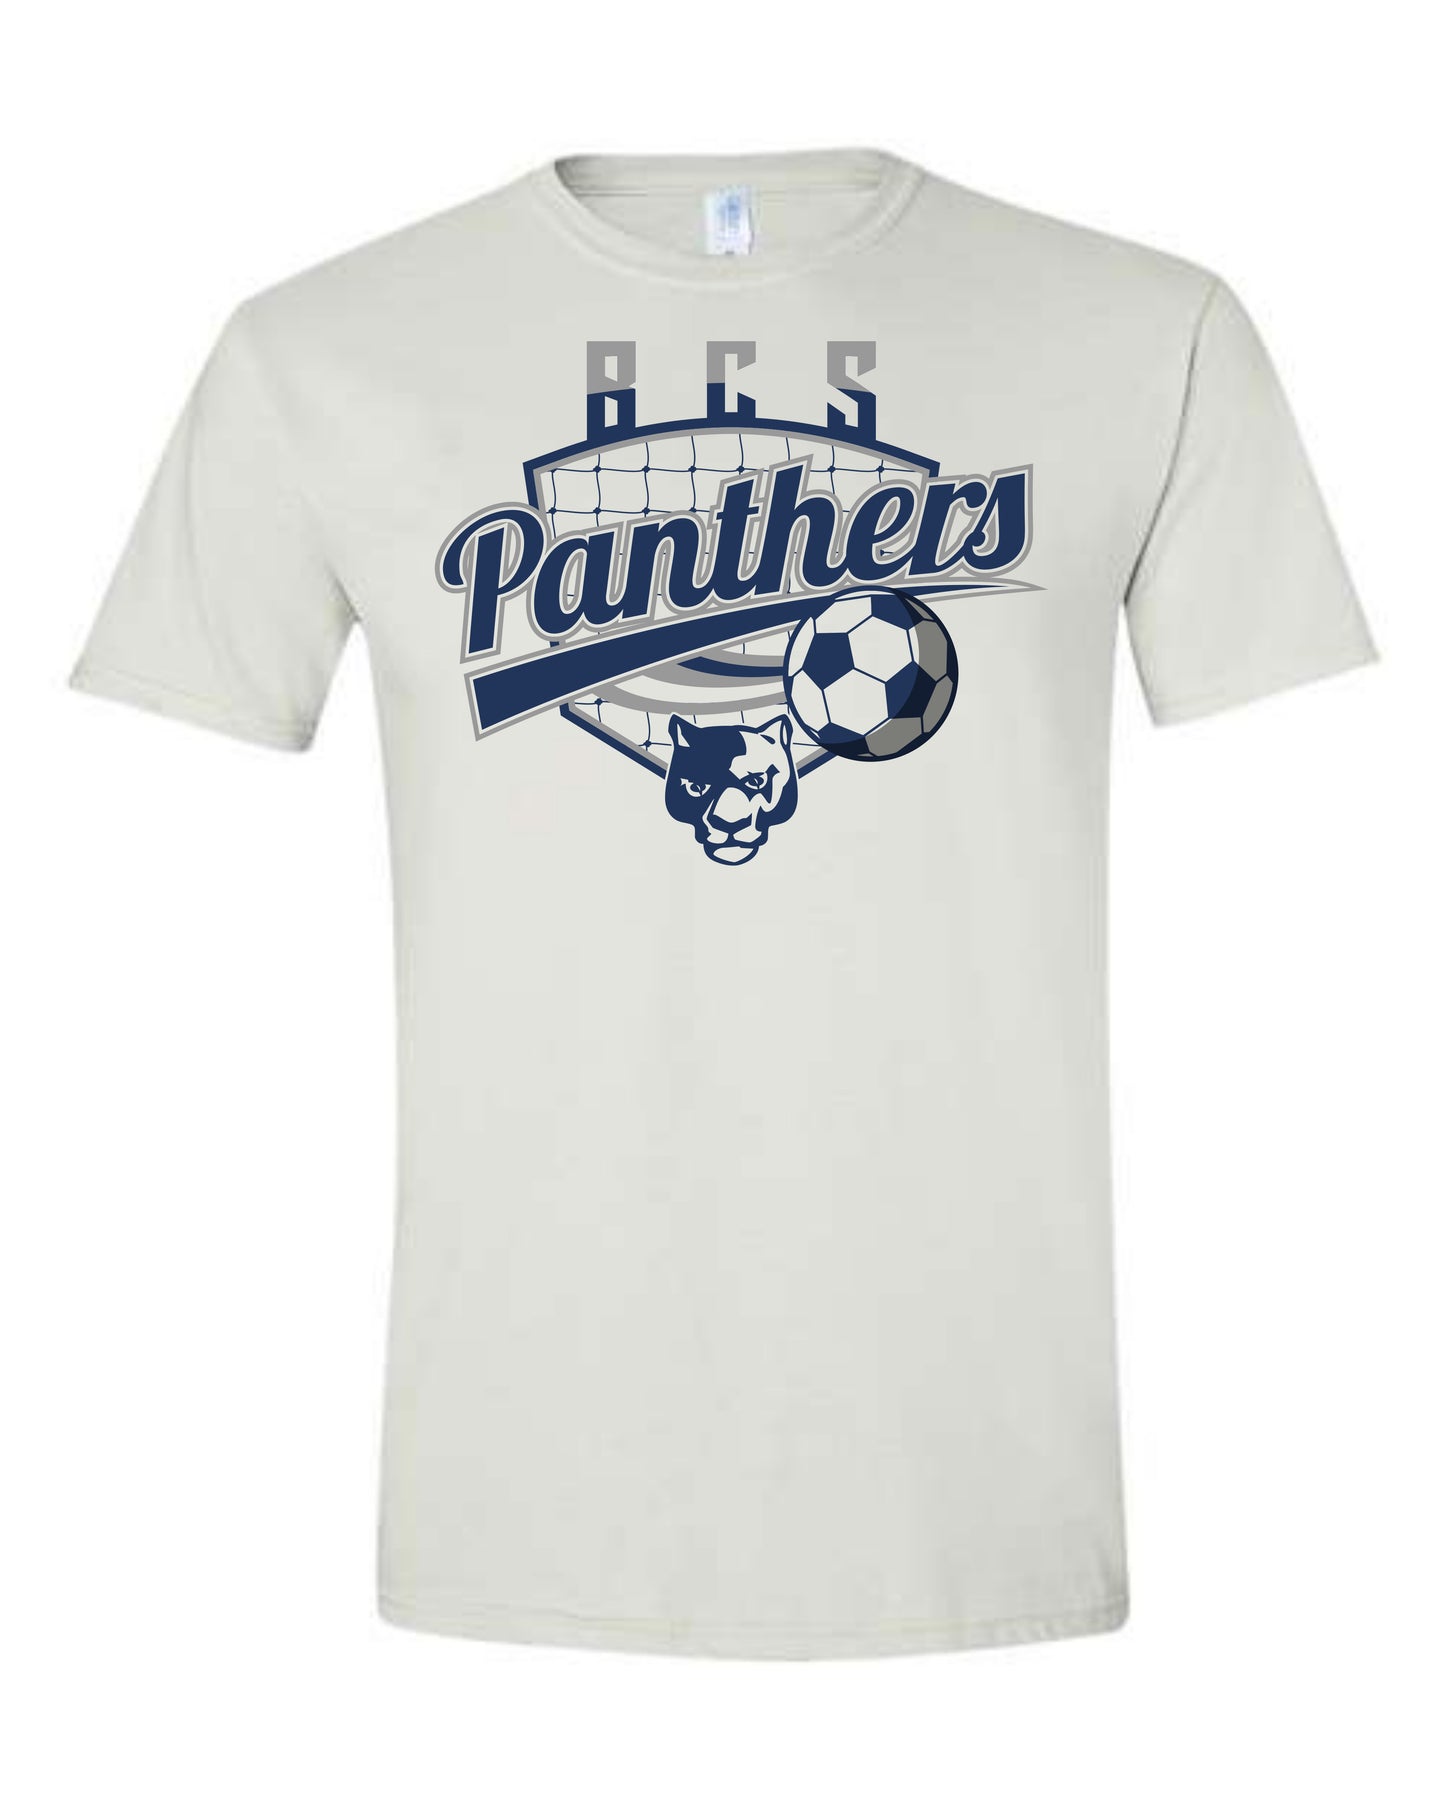 BCS Panthers Soccer Shield - Youth Tee